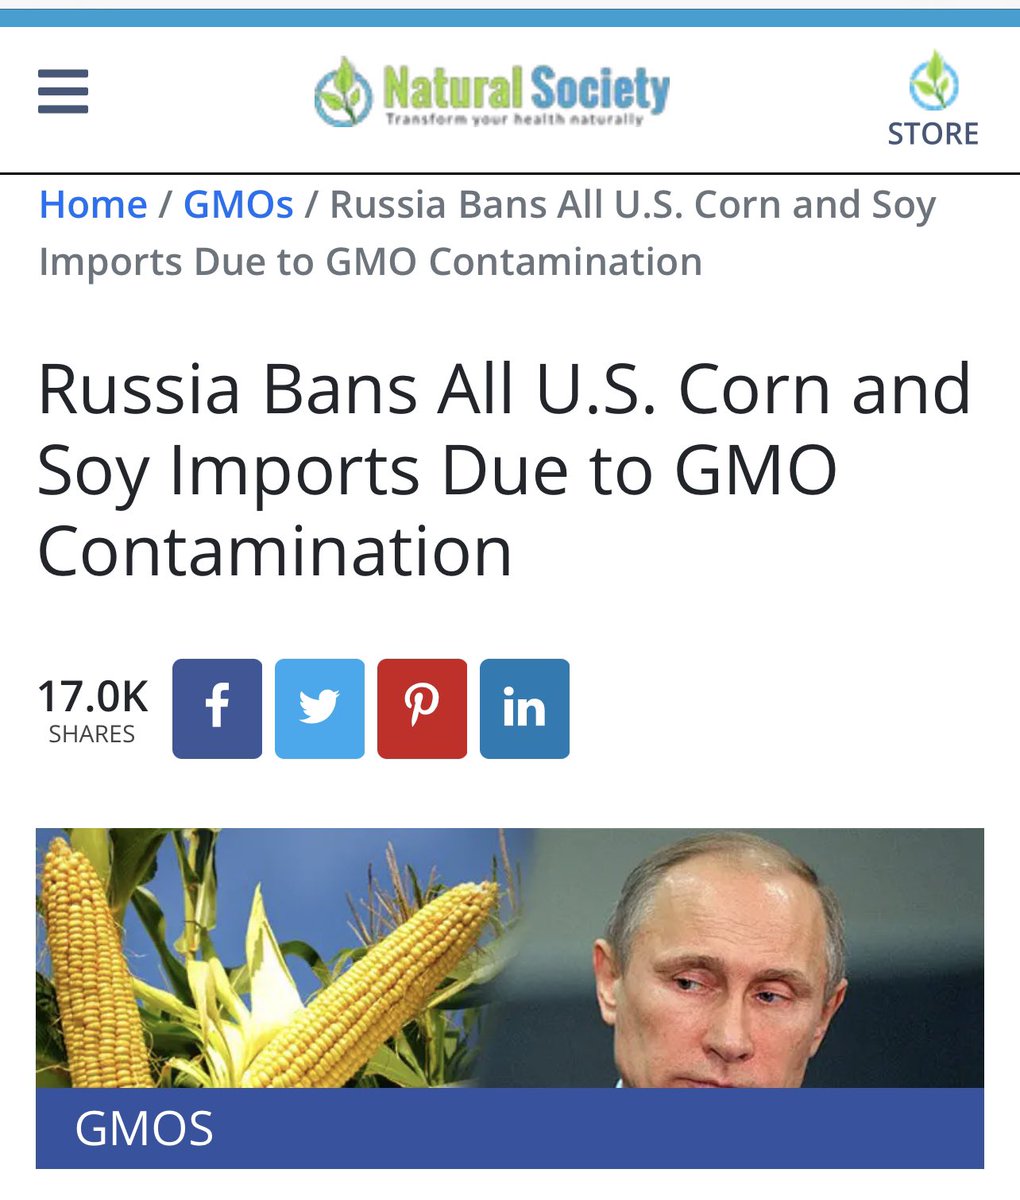 Russia Bans All U.S. Corn and Soy Imports Due to GMO Contamination Looking like a top President. Meanwhile, in England’s Green and Pleasant land, all of our food is going to be GMO… All! Your government love you and they are your mummy and daddy naturalsociety.com/russia-bans-us…